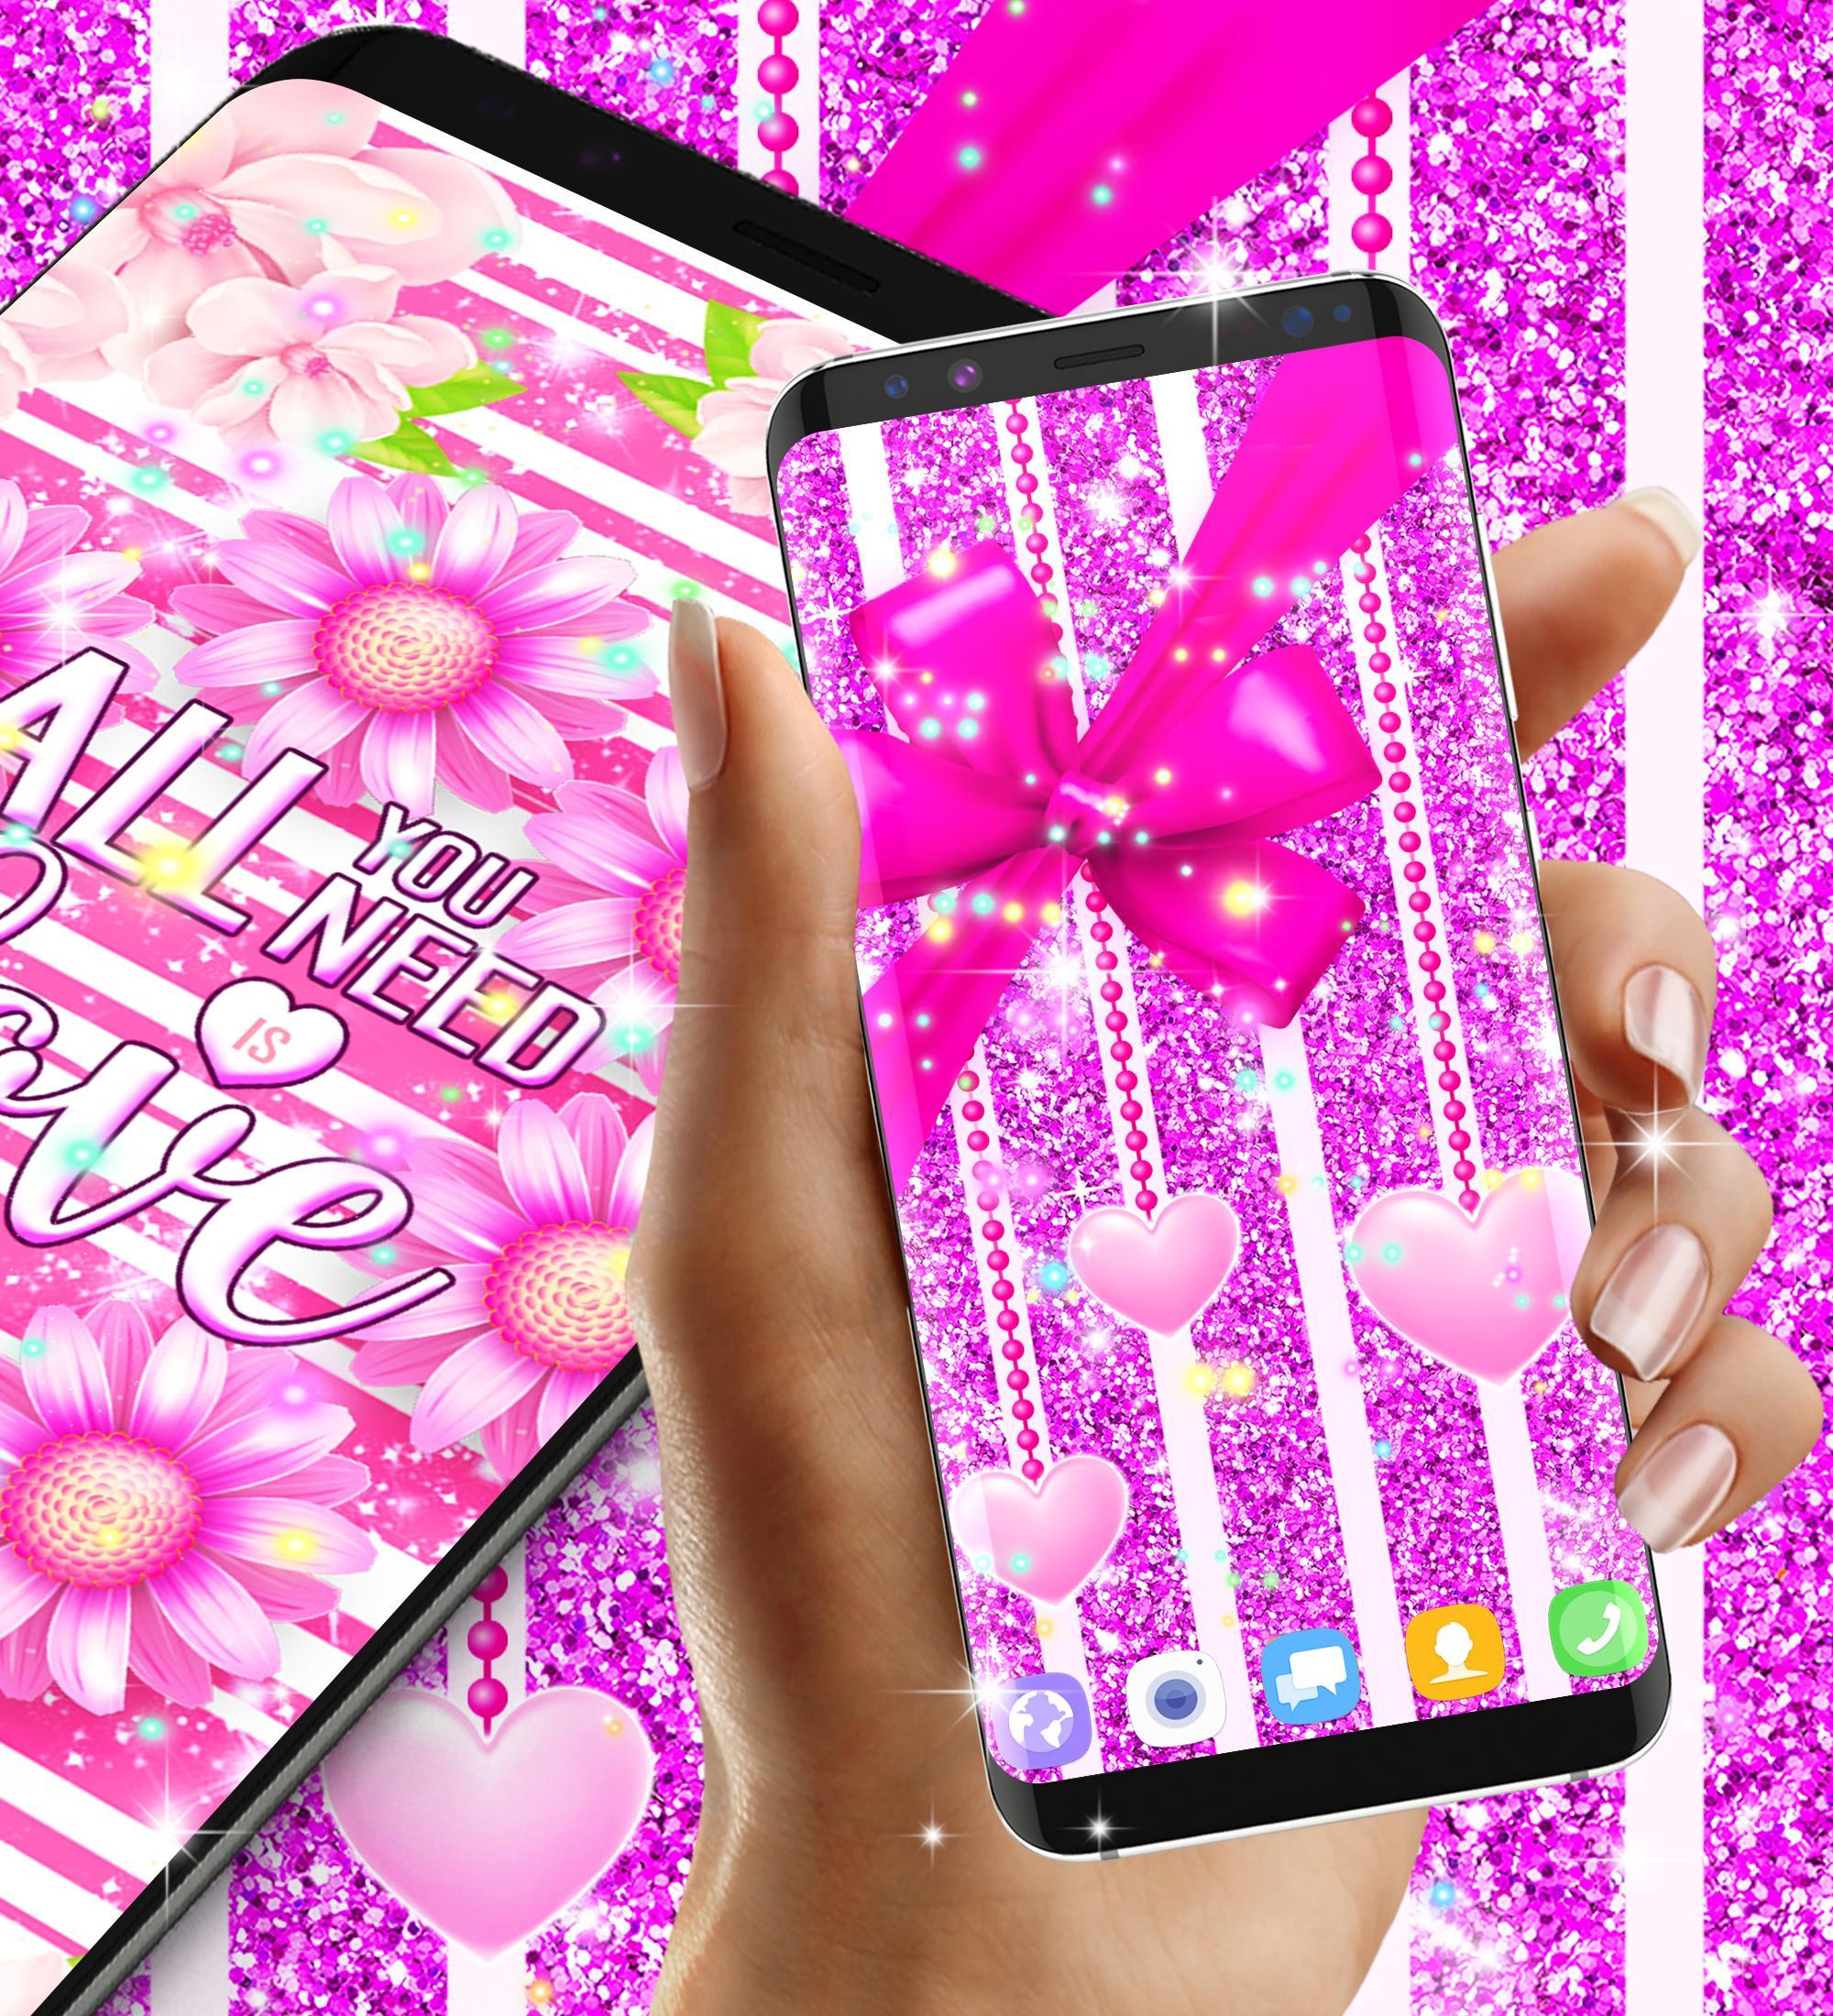 Girly Live Wallpapers For Android For Android Apk Download - roblox live wallpaper for android apk download